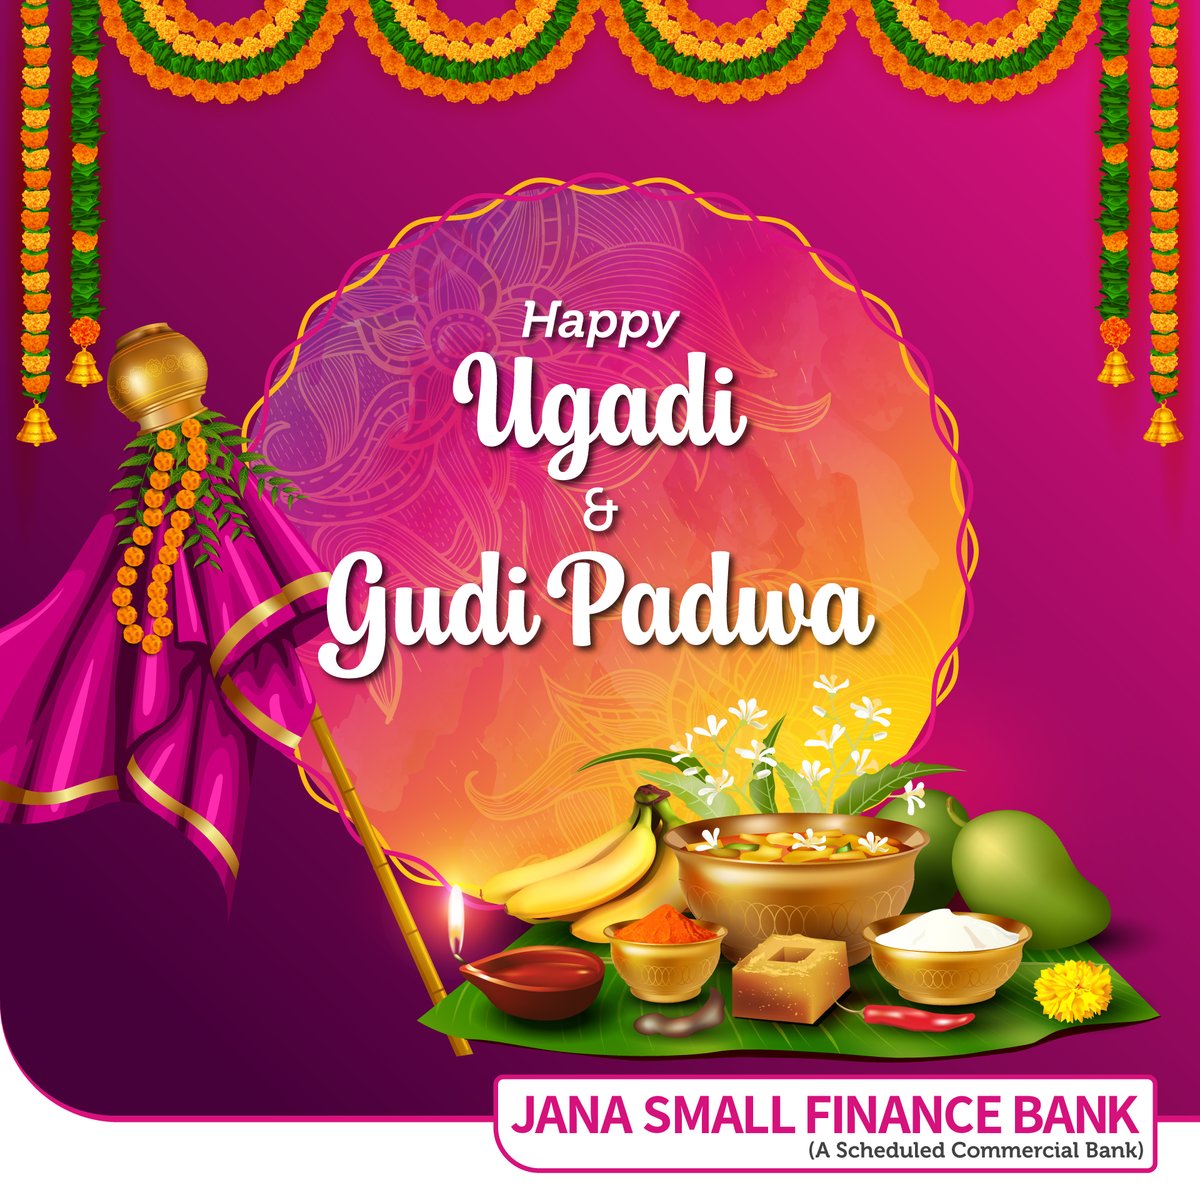 On this auspicious day, let's leave behind the old and embrace the new with hope and enthusiasm. May the coming year be filled with joy, peace, and prosperity. Wishing you all a Happy Ugadi and Gudi Padwa! #Ugadi #GudiPadwa #janabank